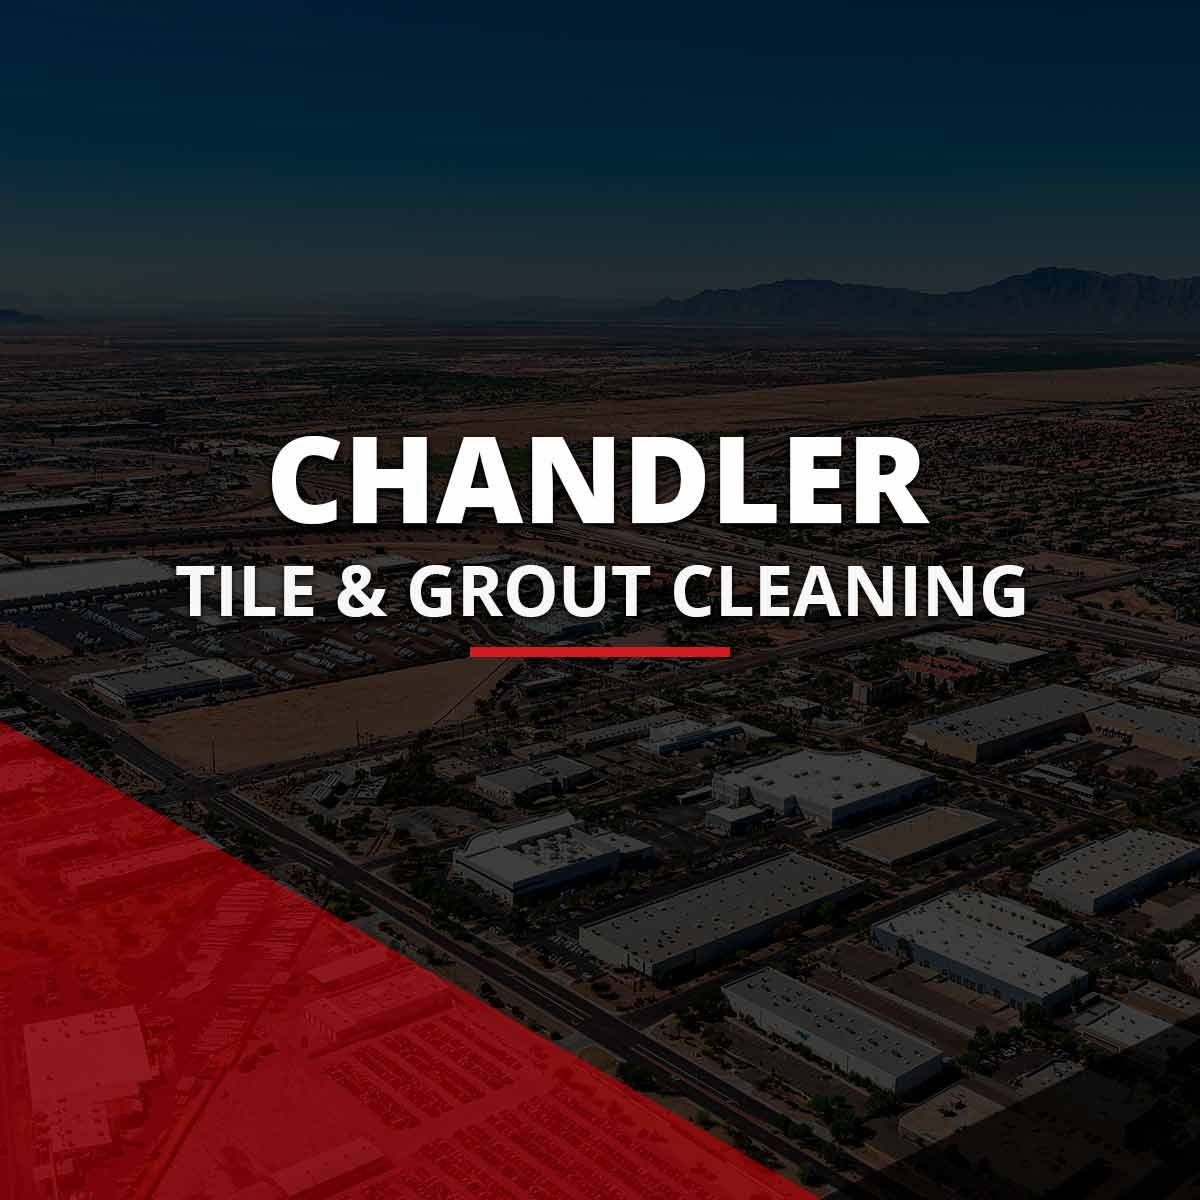 Chandler Tile & Grout Cleaning | Arizona Stone Care